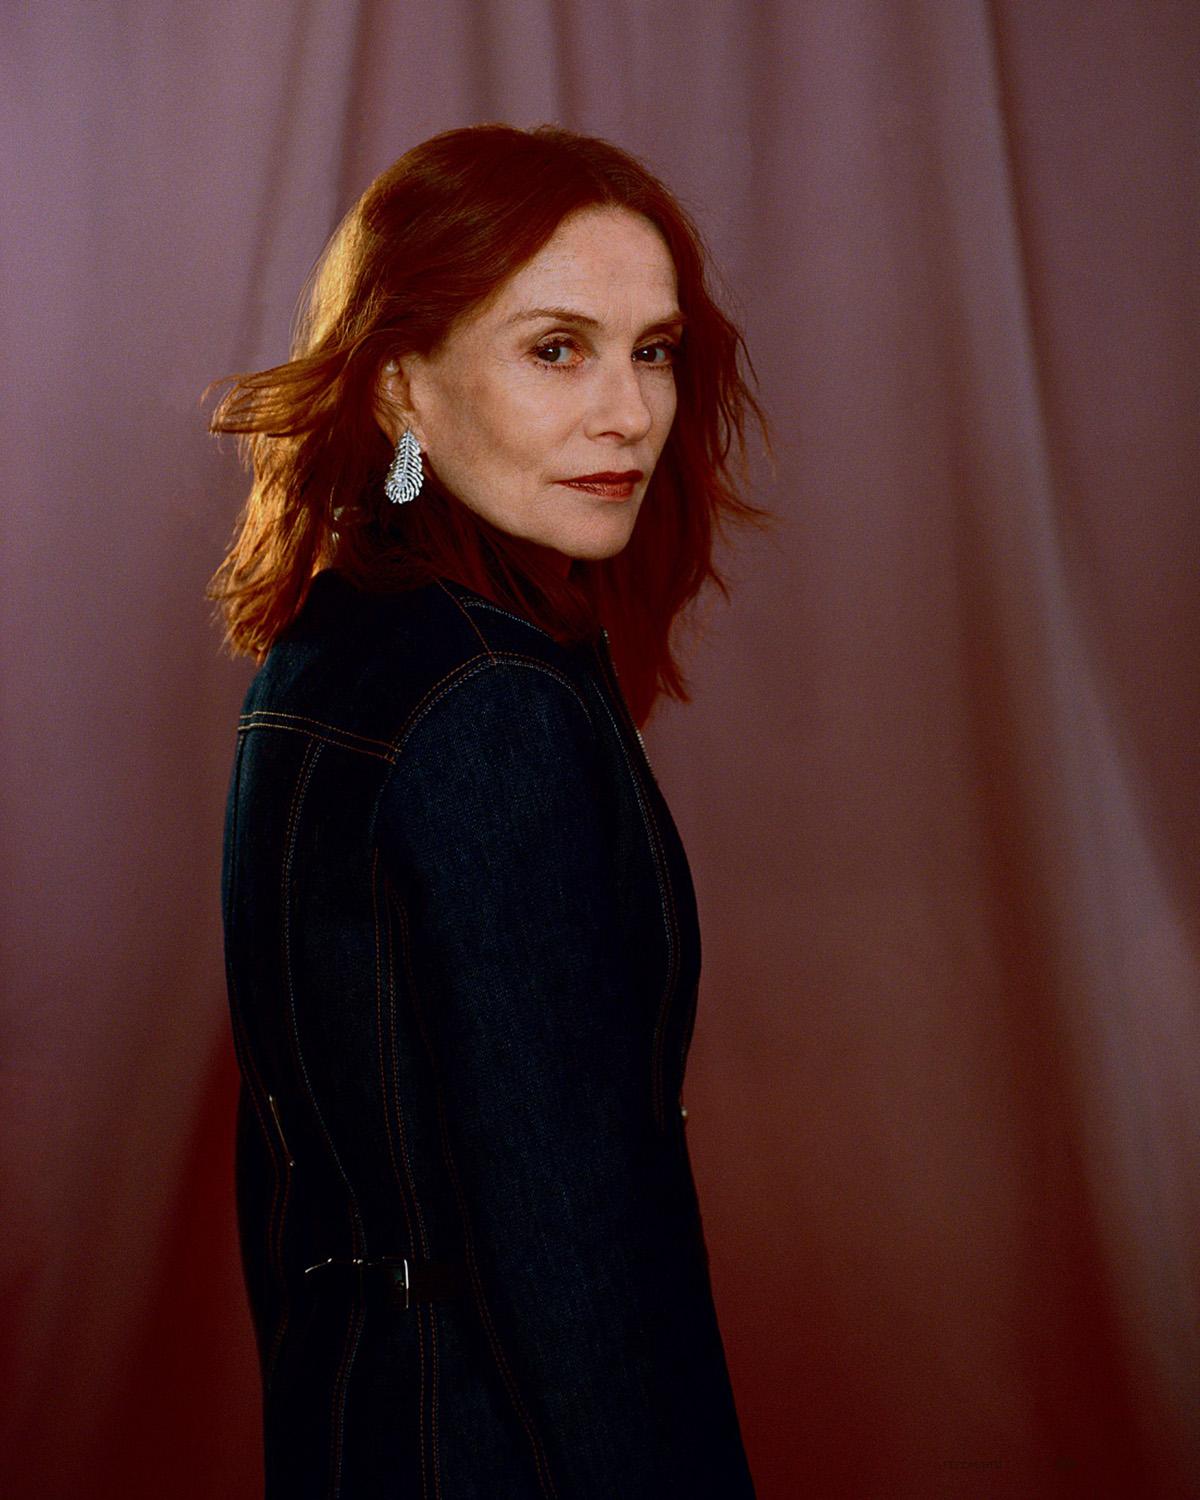 Isabelle Huppert covers How To Spend It September 25th, 2021 by Kuba Ryniewicz